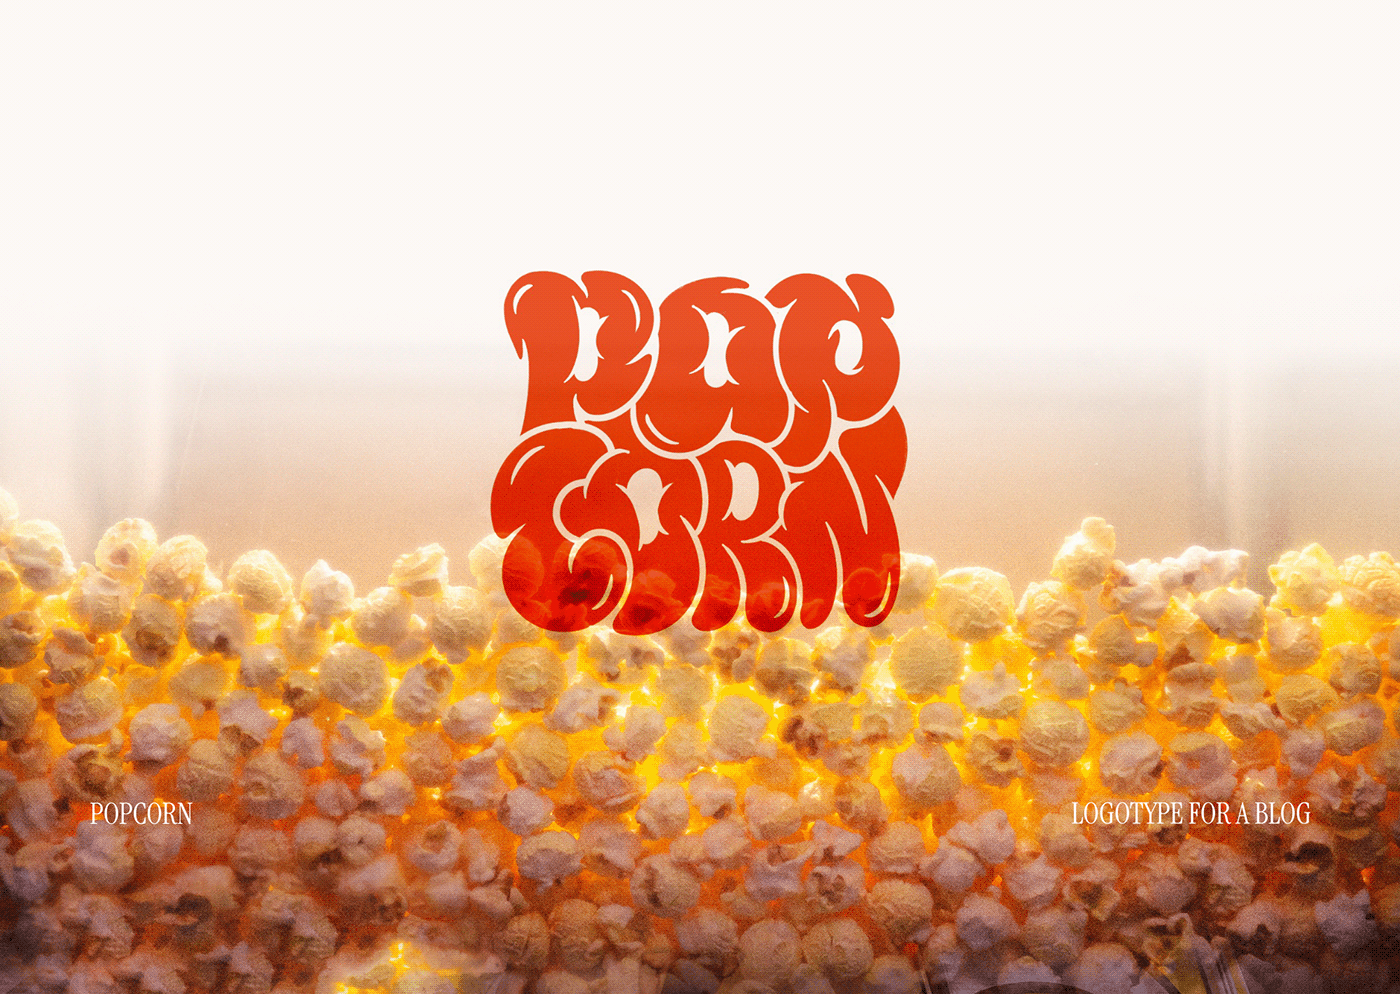 Lettering Popcorn in Bubble style. Logotype for a travel blog.